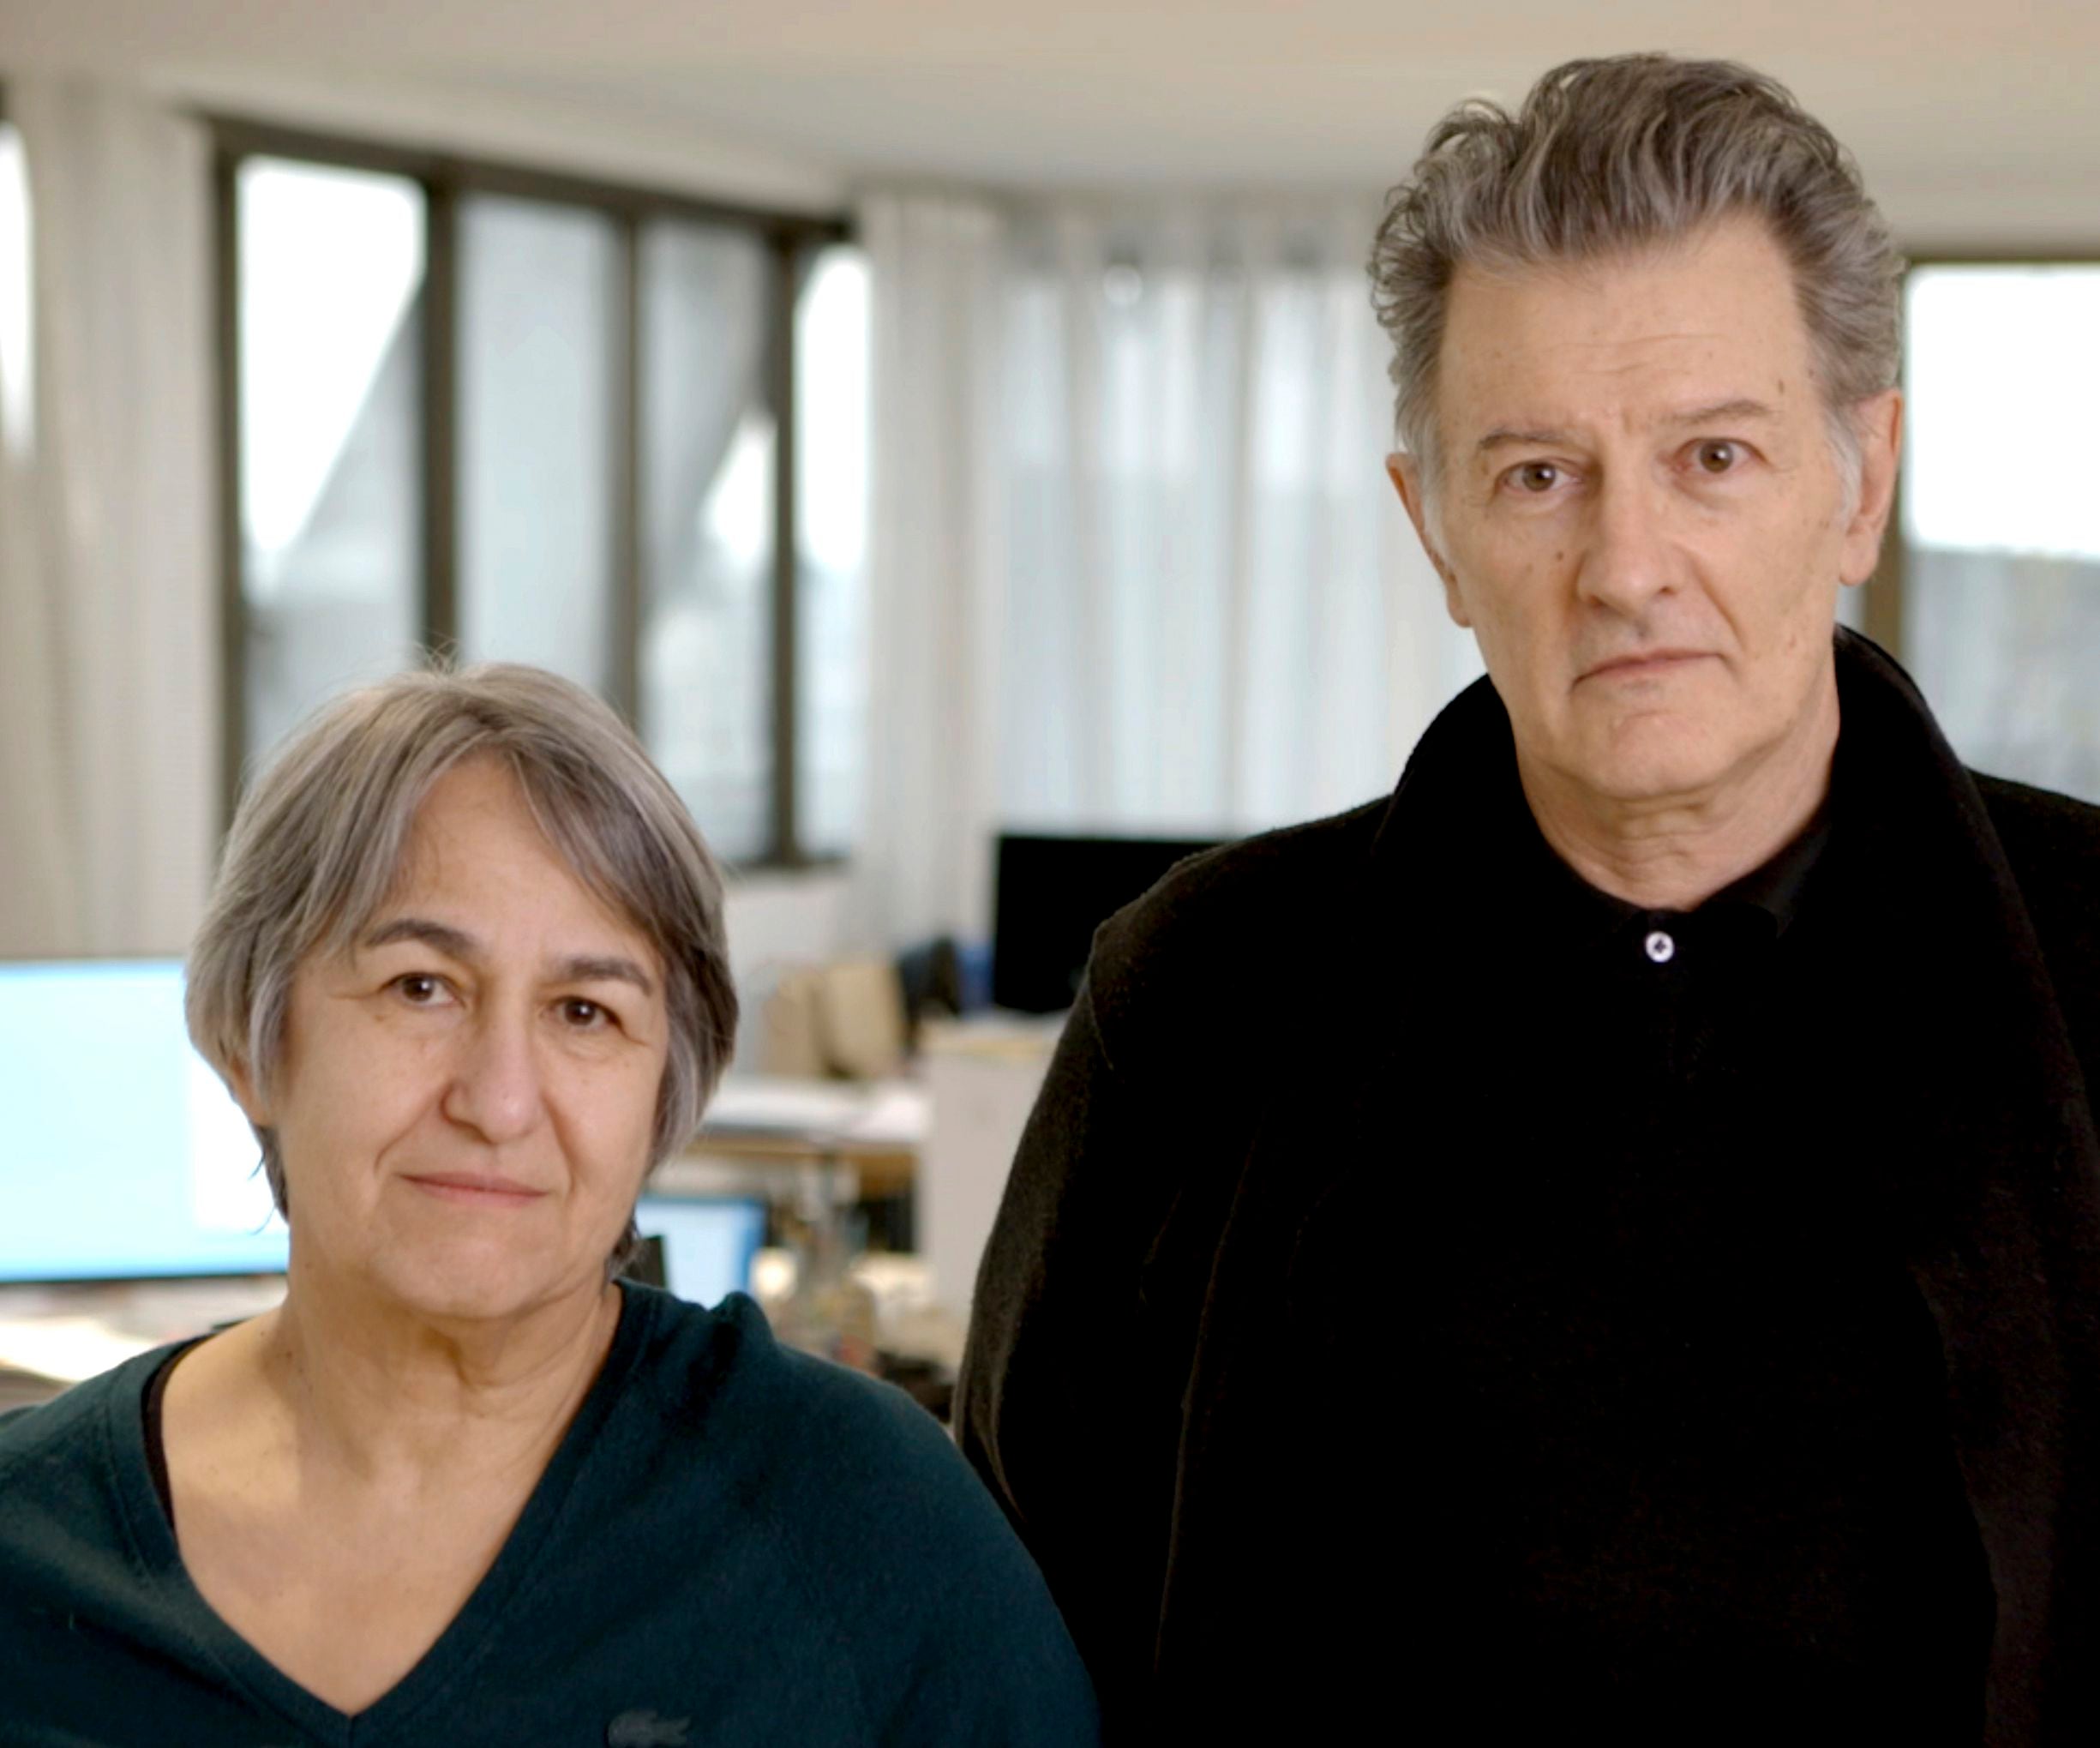 Pritzker Architecture Prize awarded to Paris-based duo